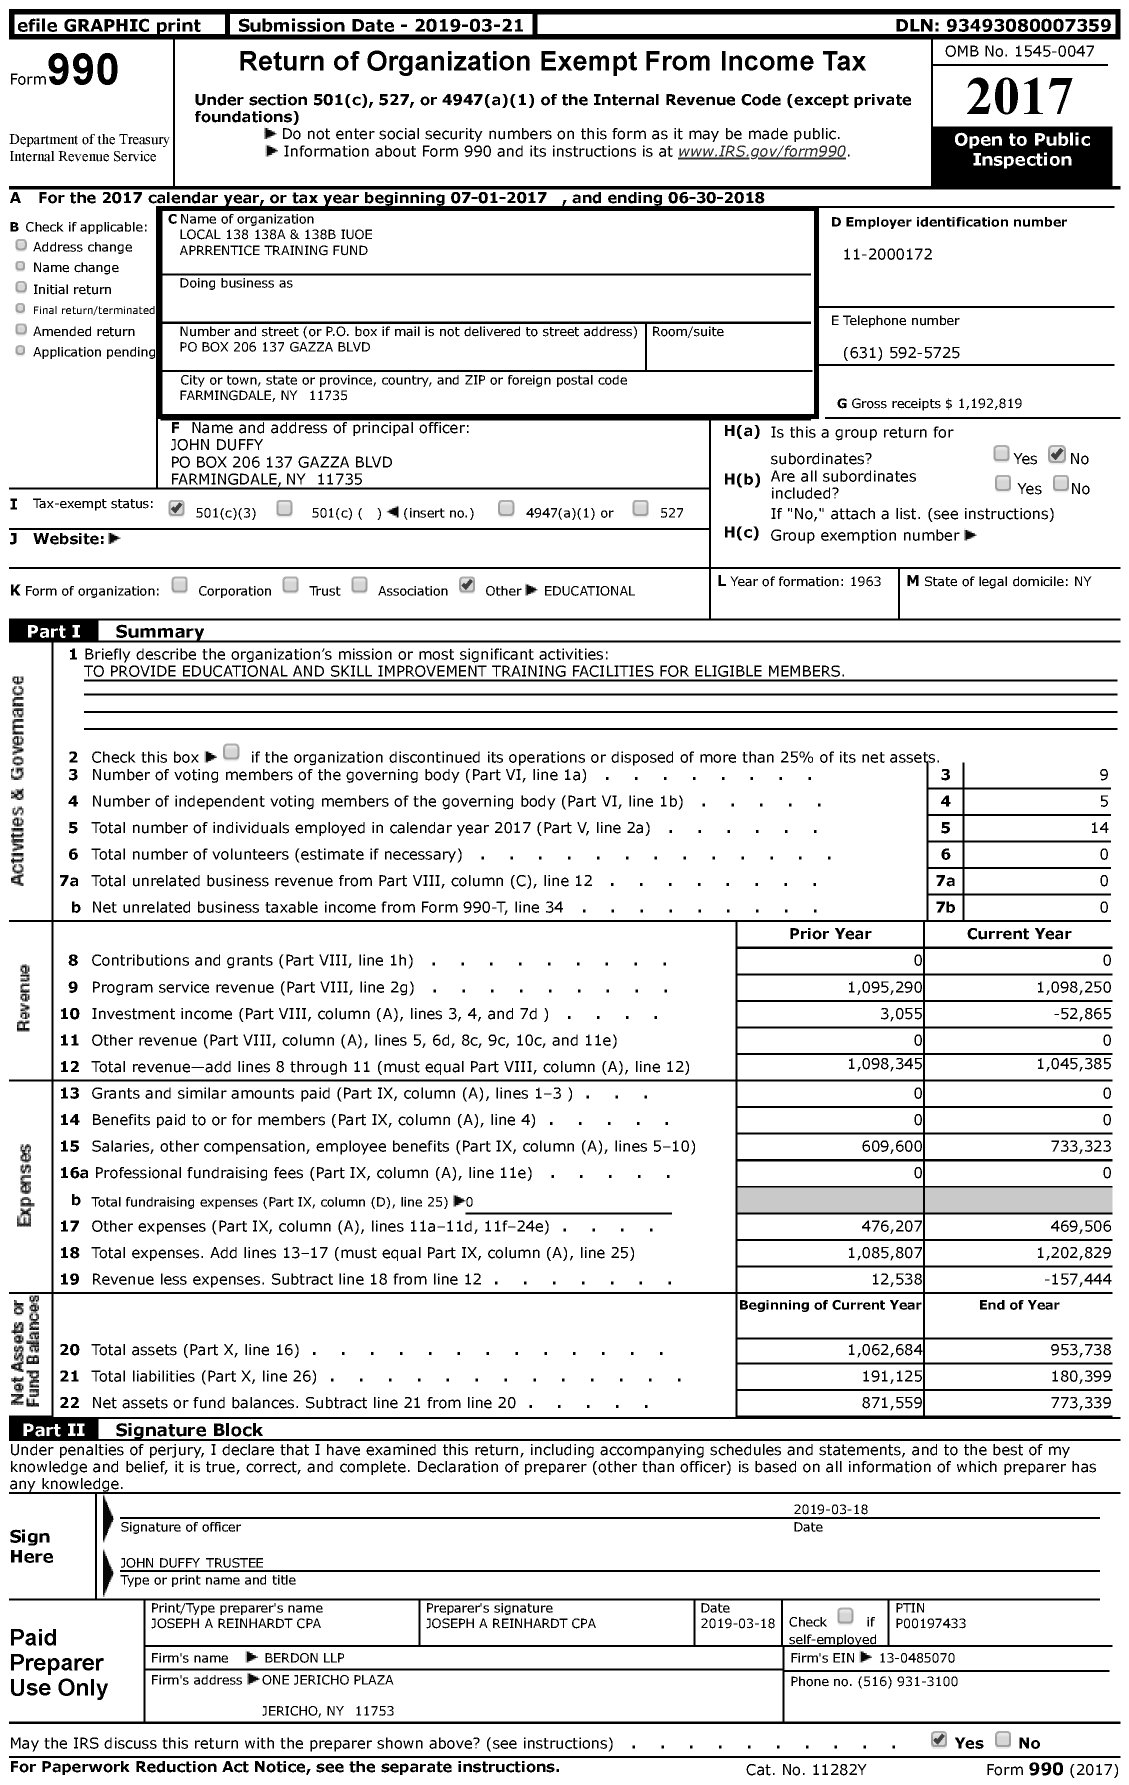 Image of first page of 2017 Form 990 for Local 138 138a and 138b Iuoe Apprentice Training Fund